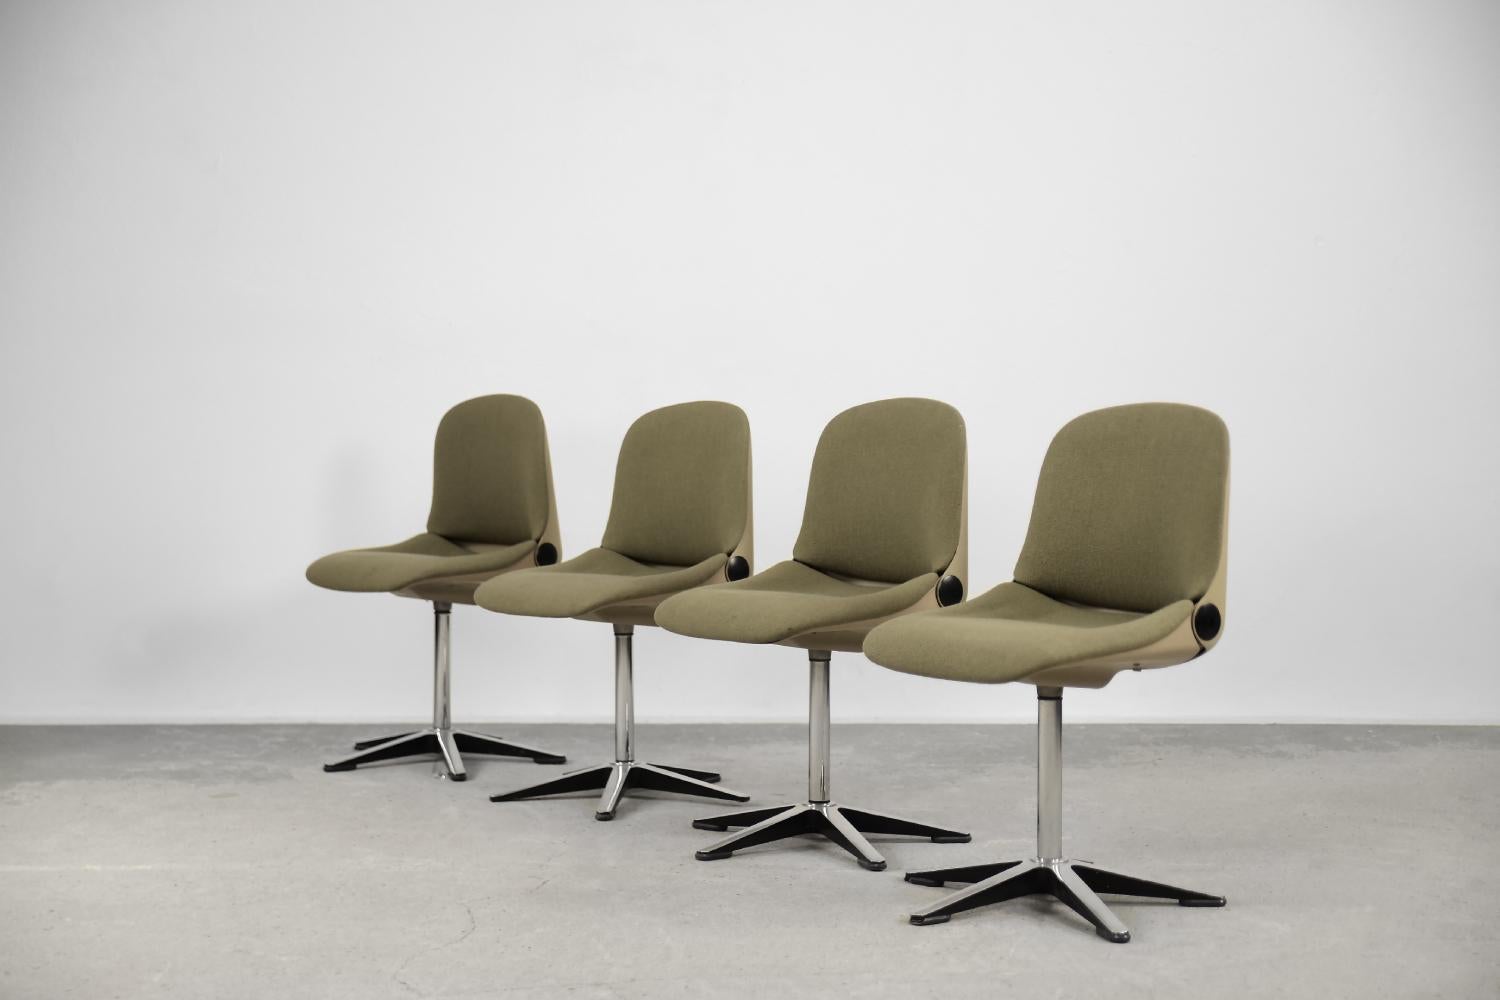 This office chairs were designed by Wilhelm Ritz for the German manufacture Wilkhahn during the 1970s. Cataloged as the 232 model. This set was formed the basis of the company's success in the office chair segment. This non-classic design with a